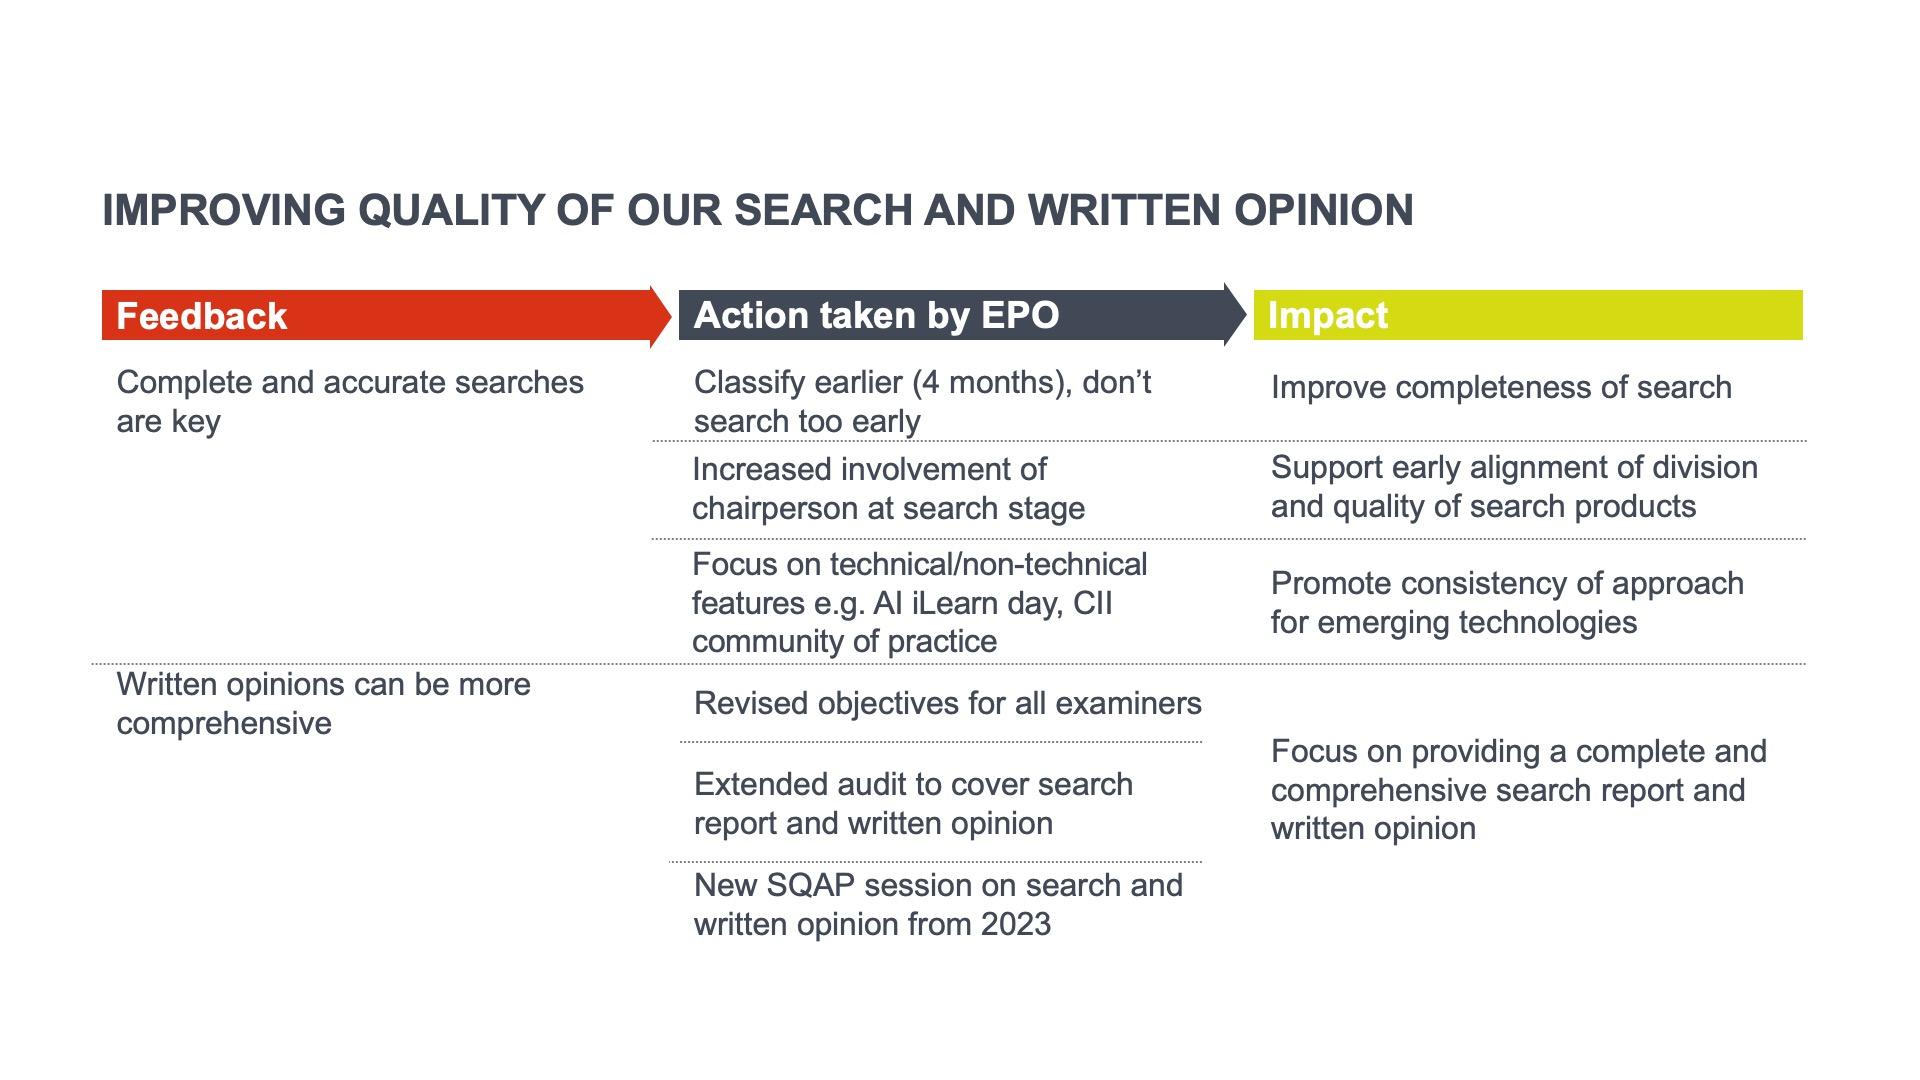 Overview of actions taken and impact of the feedback on search and written opinion